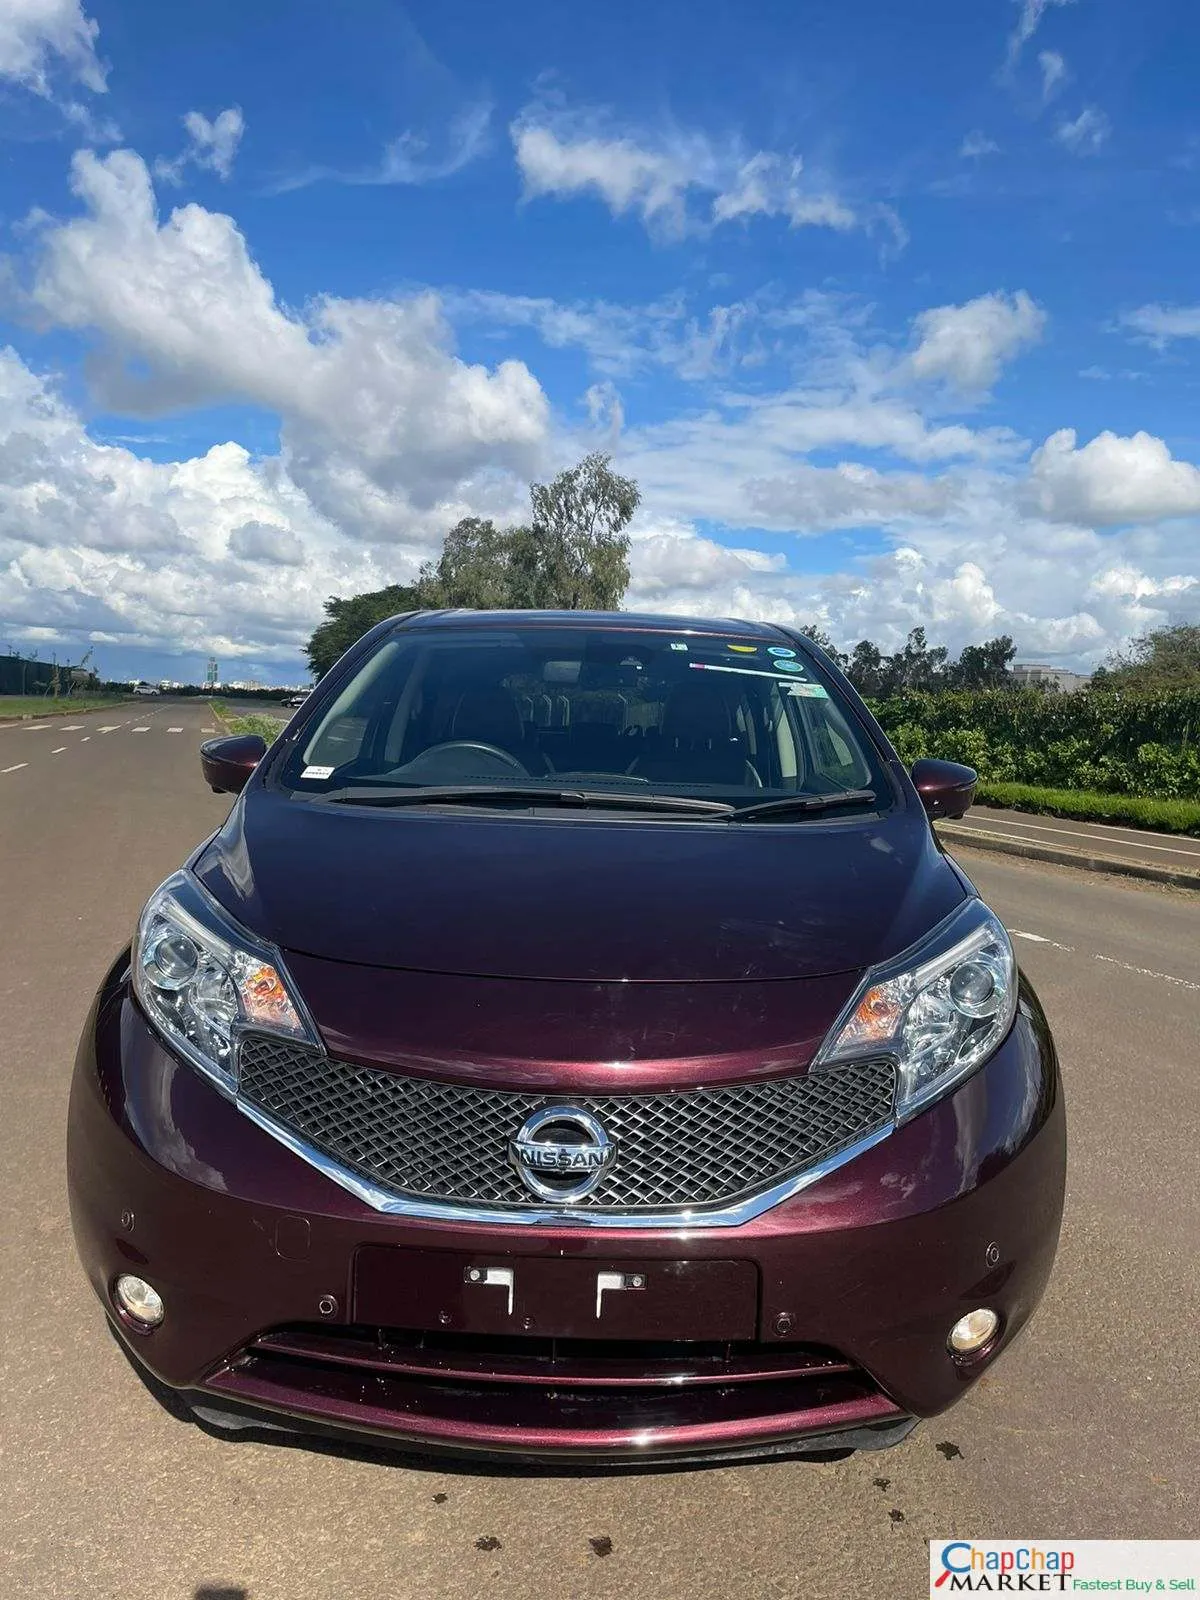 Cars Cars For Sale-Nissan Note Kenya New QUICK SALE You Pay 20% Deposit Trade in Ok Nissan Note for sale in kenya hire purchase installments EXCLUSIVE 2017 9